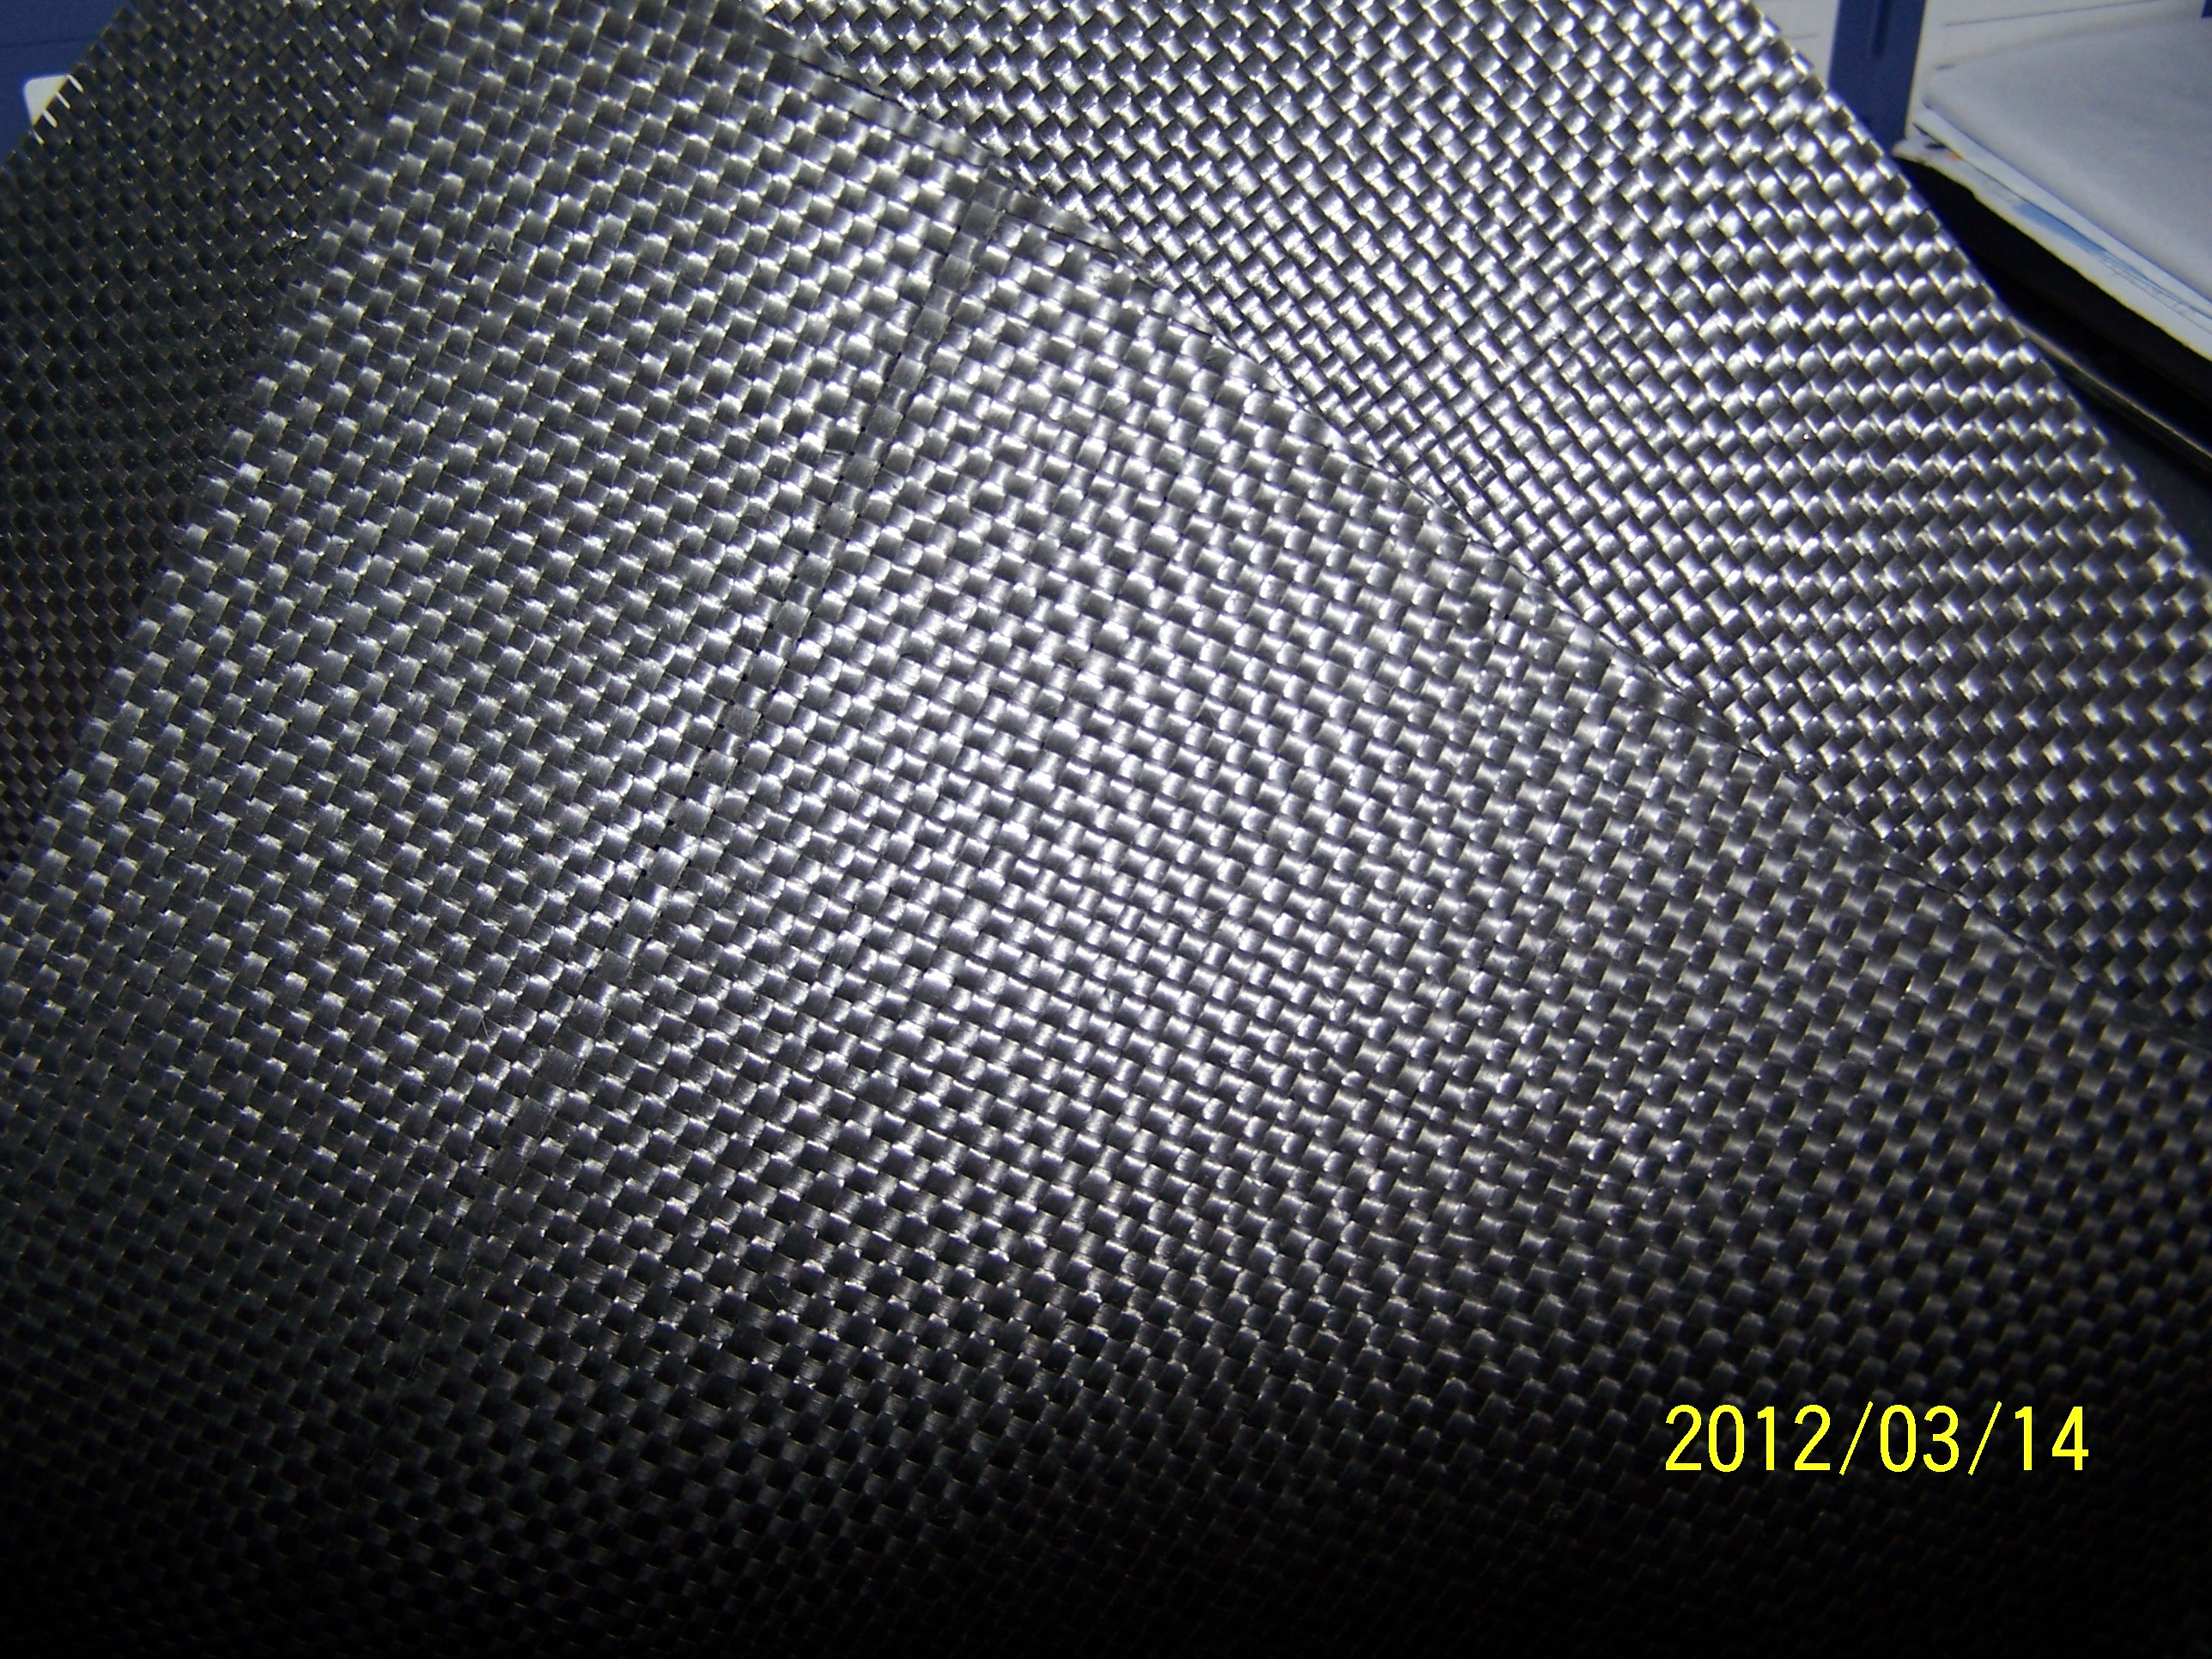 PP Woven Geotextile has many applications